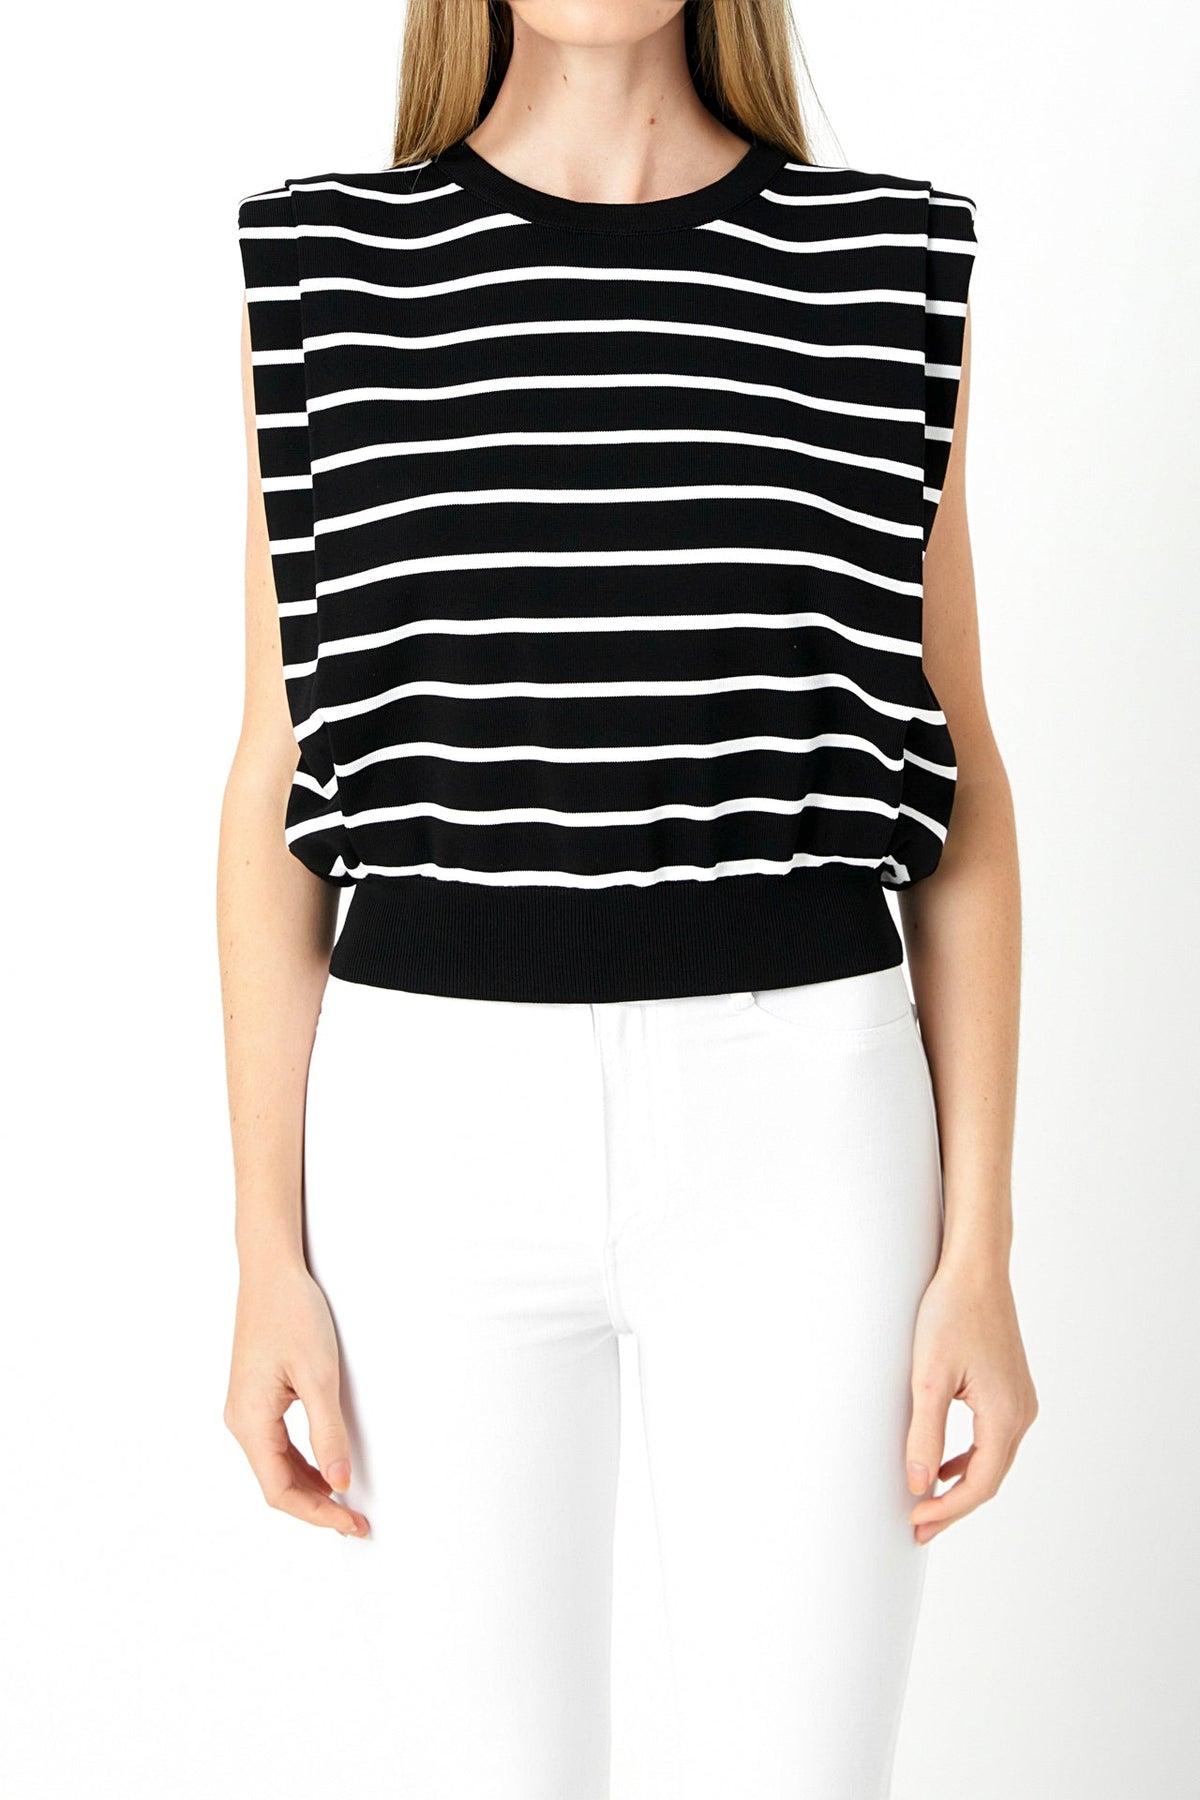 ENDLESS ROSE - Stripe Sleeveless Pleated Knit Top - TOPS available at Objectrare